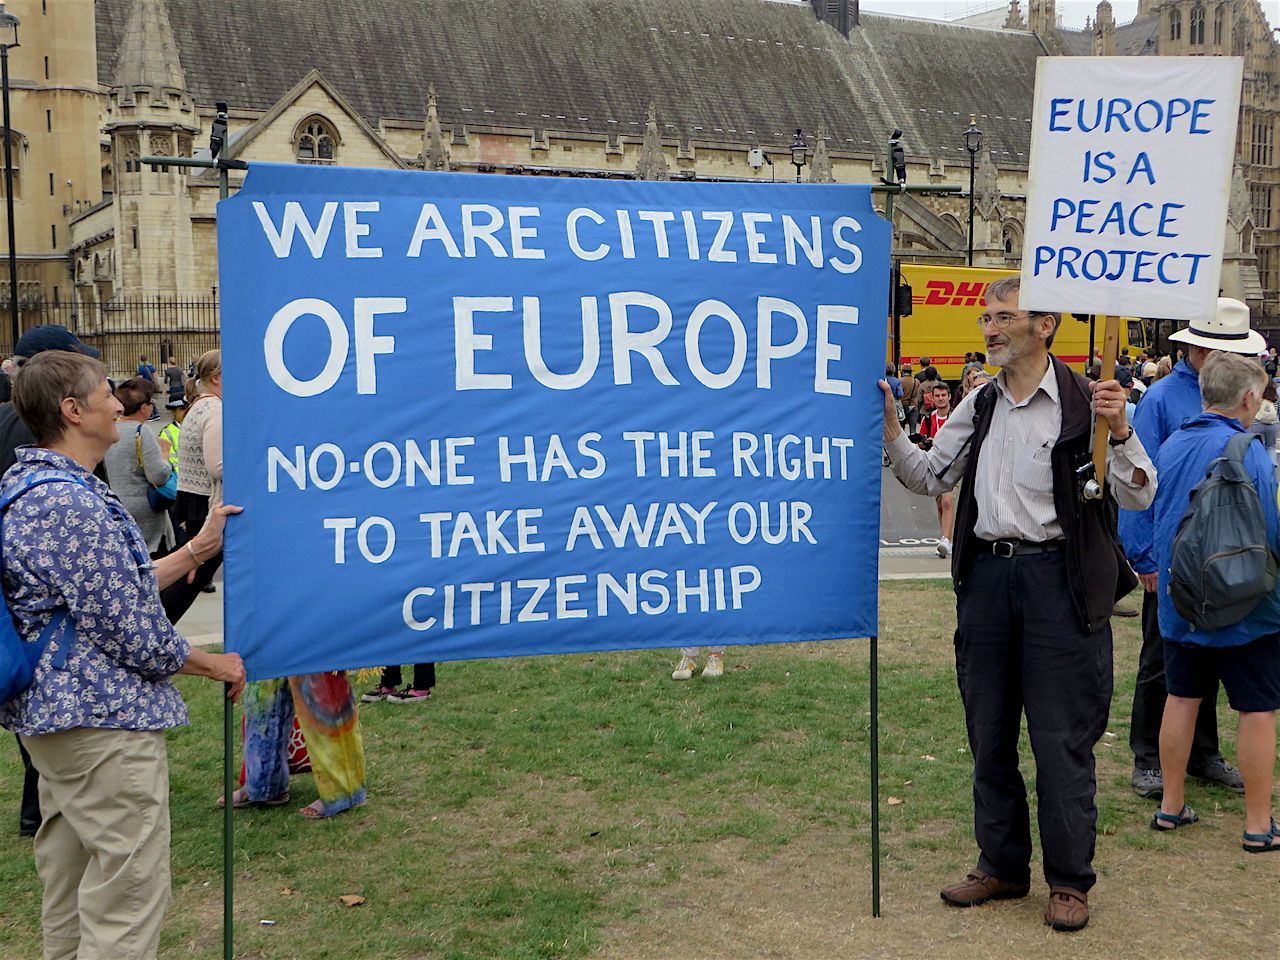 'We are citizens of Europe: No one has the right to take away our citizenship': a banner on the March for Europe in London, September 3, 2016 (Photo: Andy Worthington).